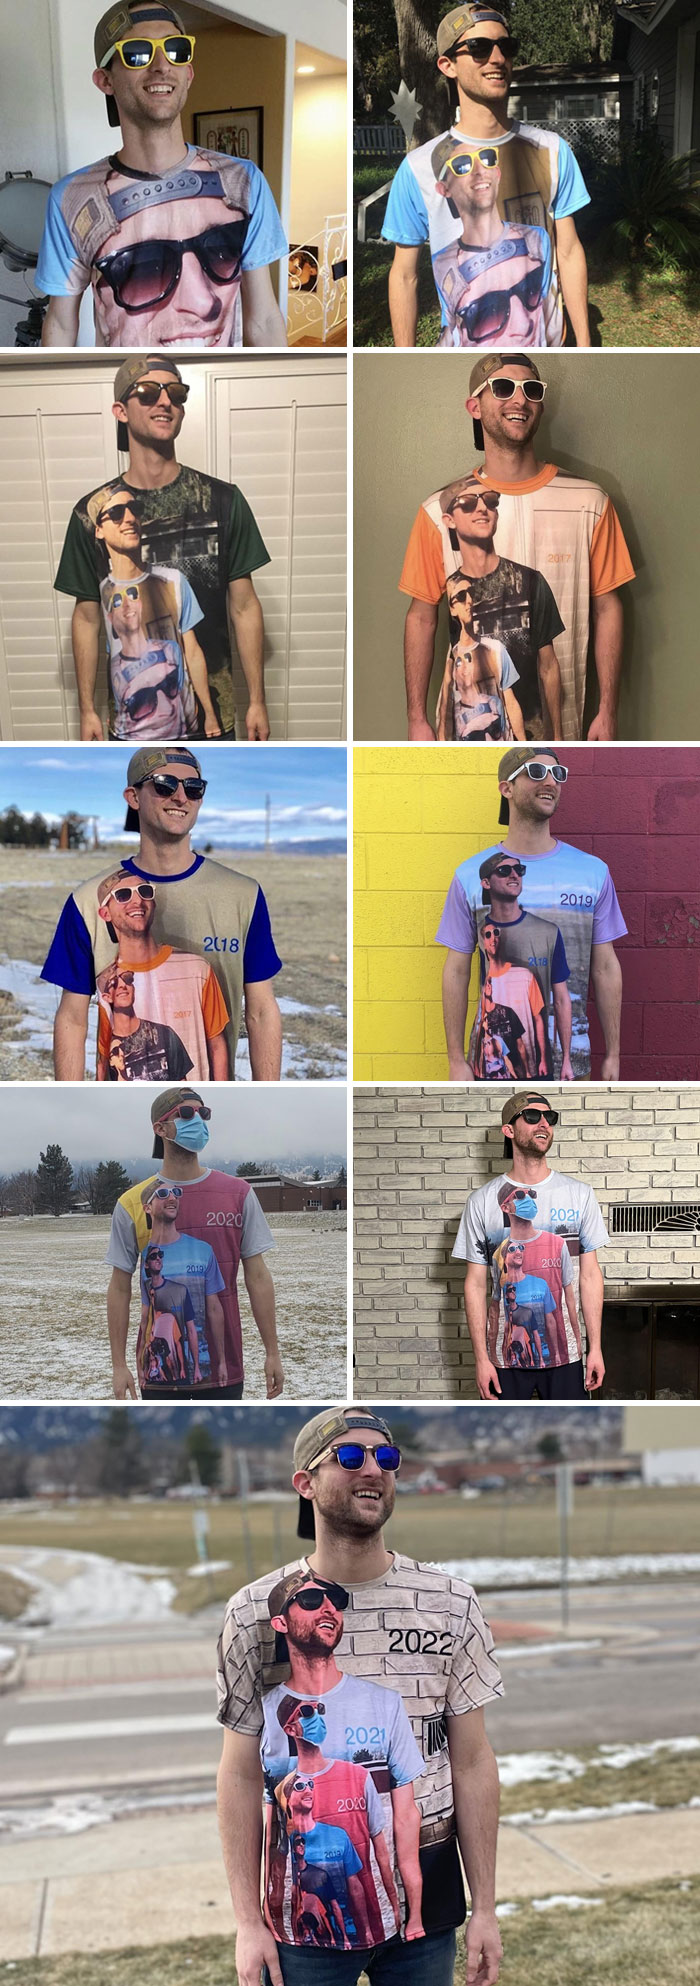 “Shirtception” - My Favorite Gift Every Year From My Brother. We’re Now At Level 9